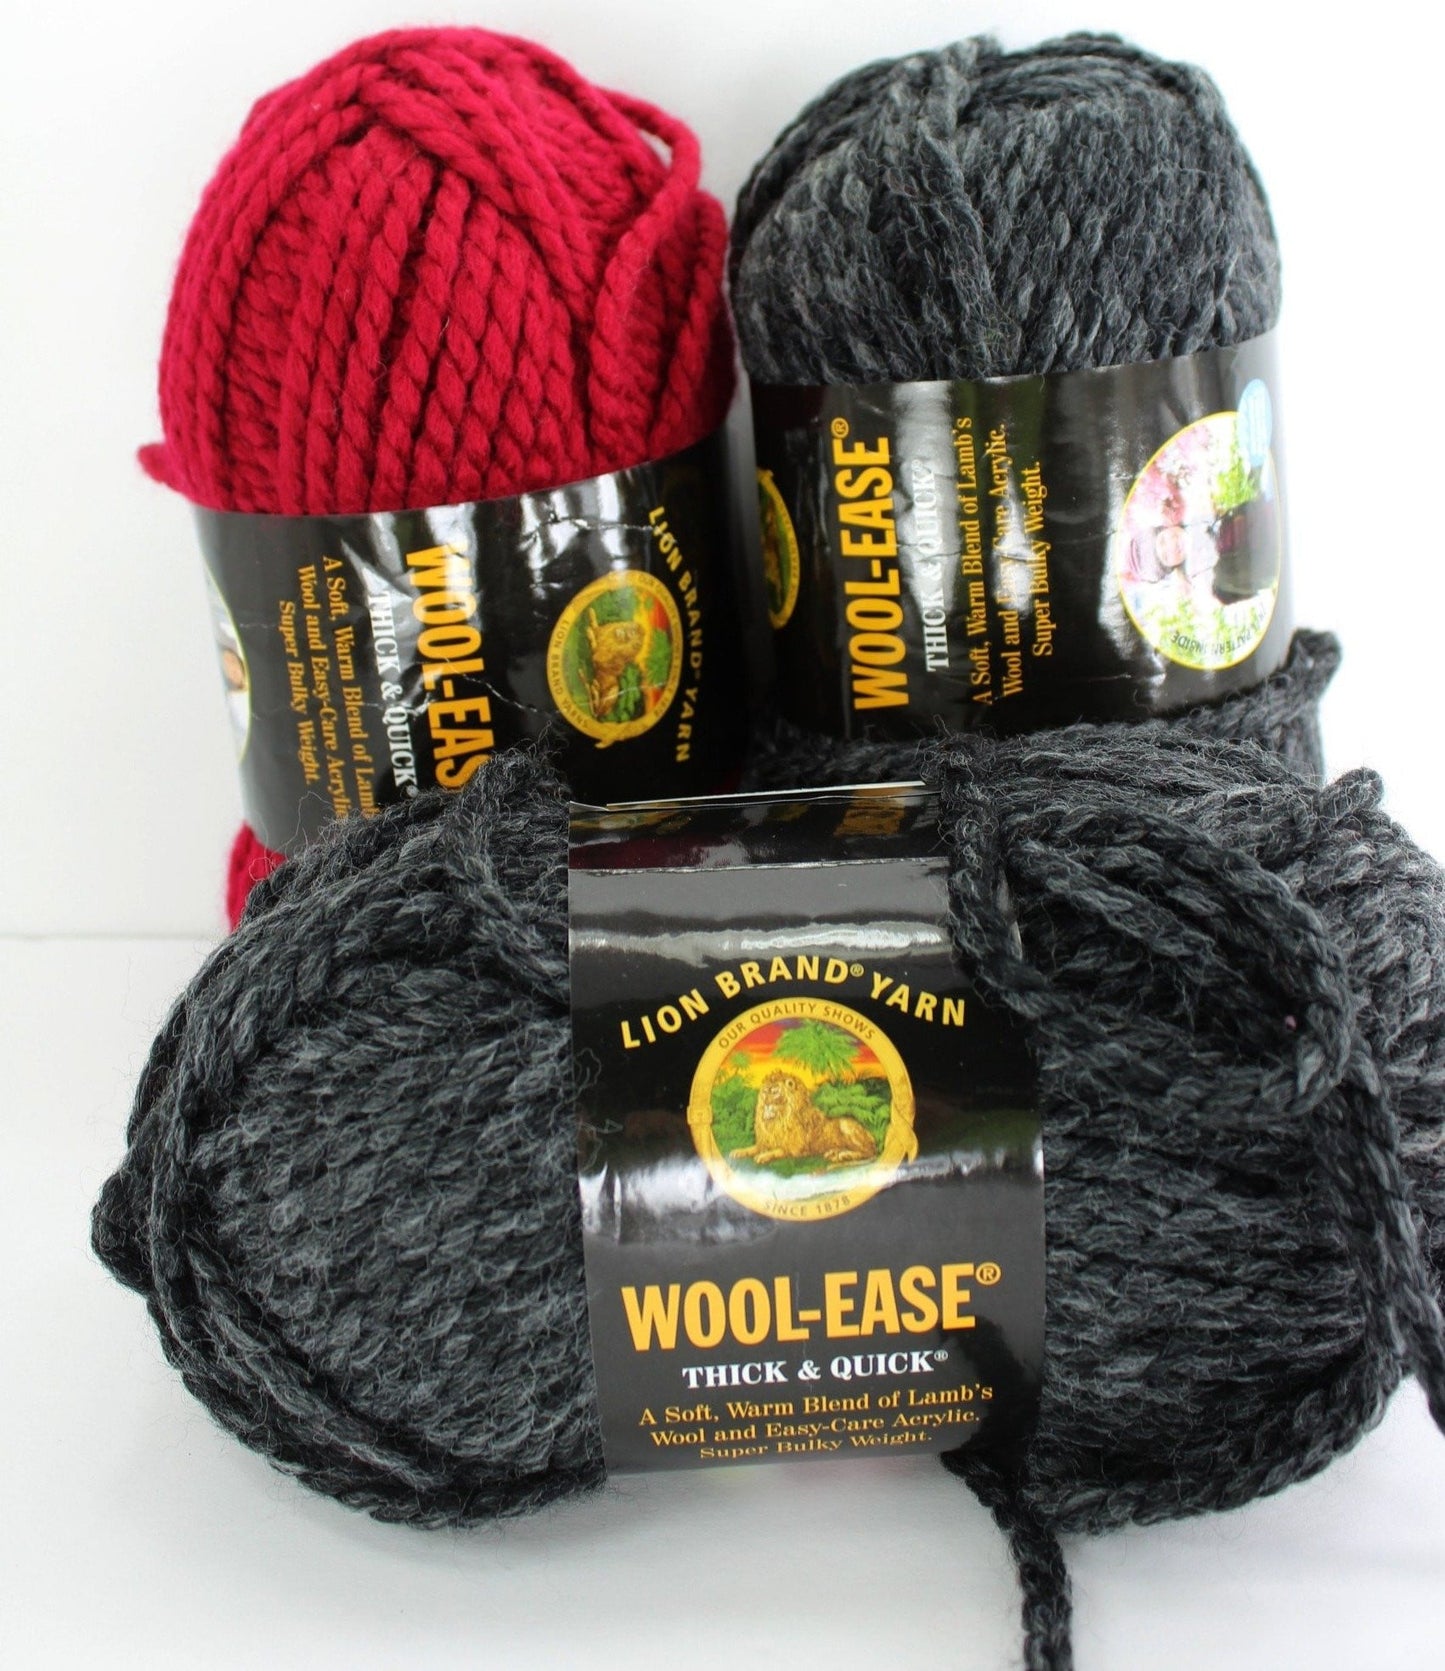 Wool Ease Yarn Thick Quiclk 80/20 Lion Charcoal Cranberry 6 ozs X 3  NWT